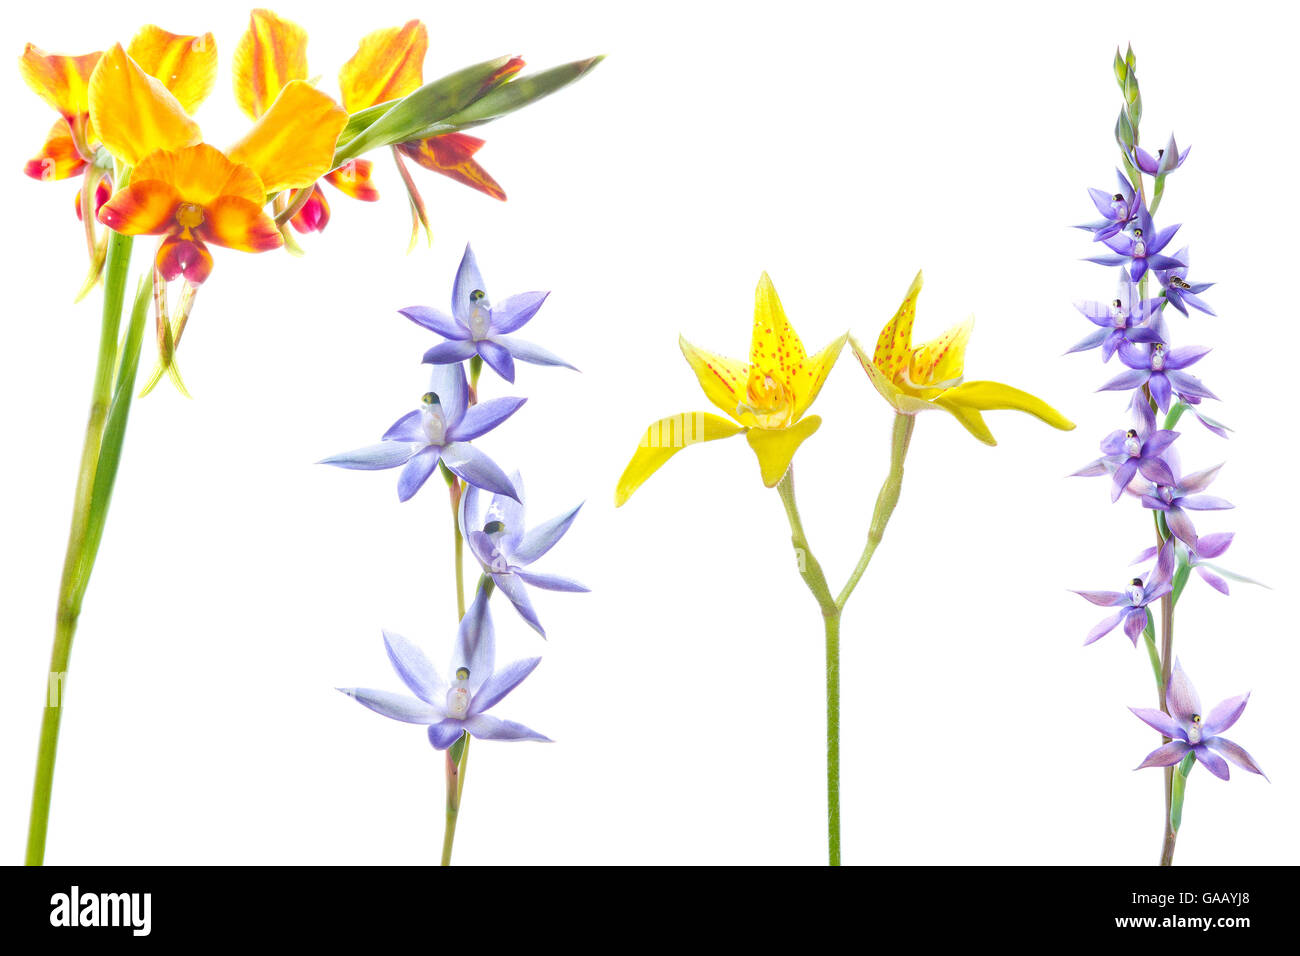 Variety of orchids from the Banksia Woodland, Swan Coastal Plain. Including Pansy orchid (Diuris magnifica), Slender sun orchid (Thelymitra vulgaris), Cowslip orchid (Caladenia flava), Plain sun orchid (Thelymitra paludosa) Swan Coastal Plain, Australia, November. Composite. Stock Photo